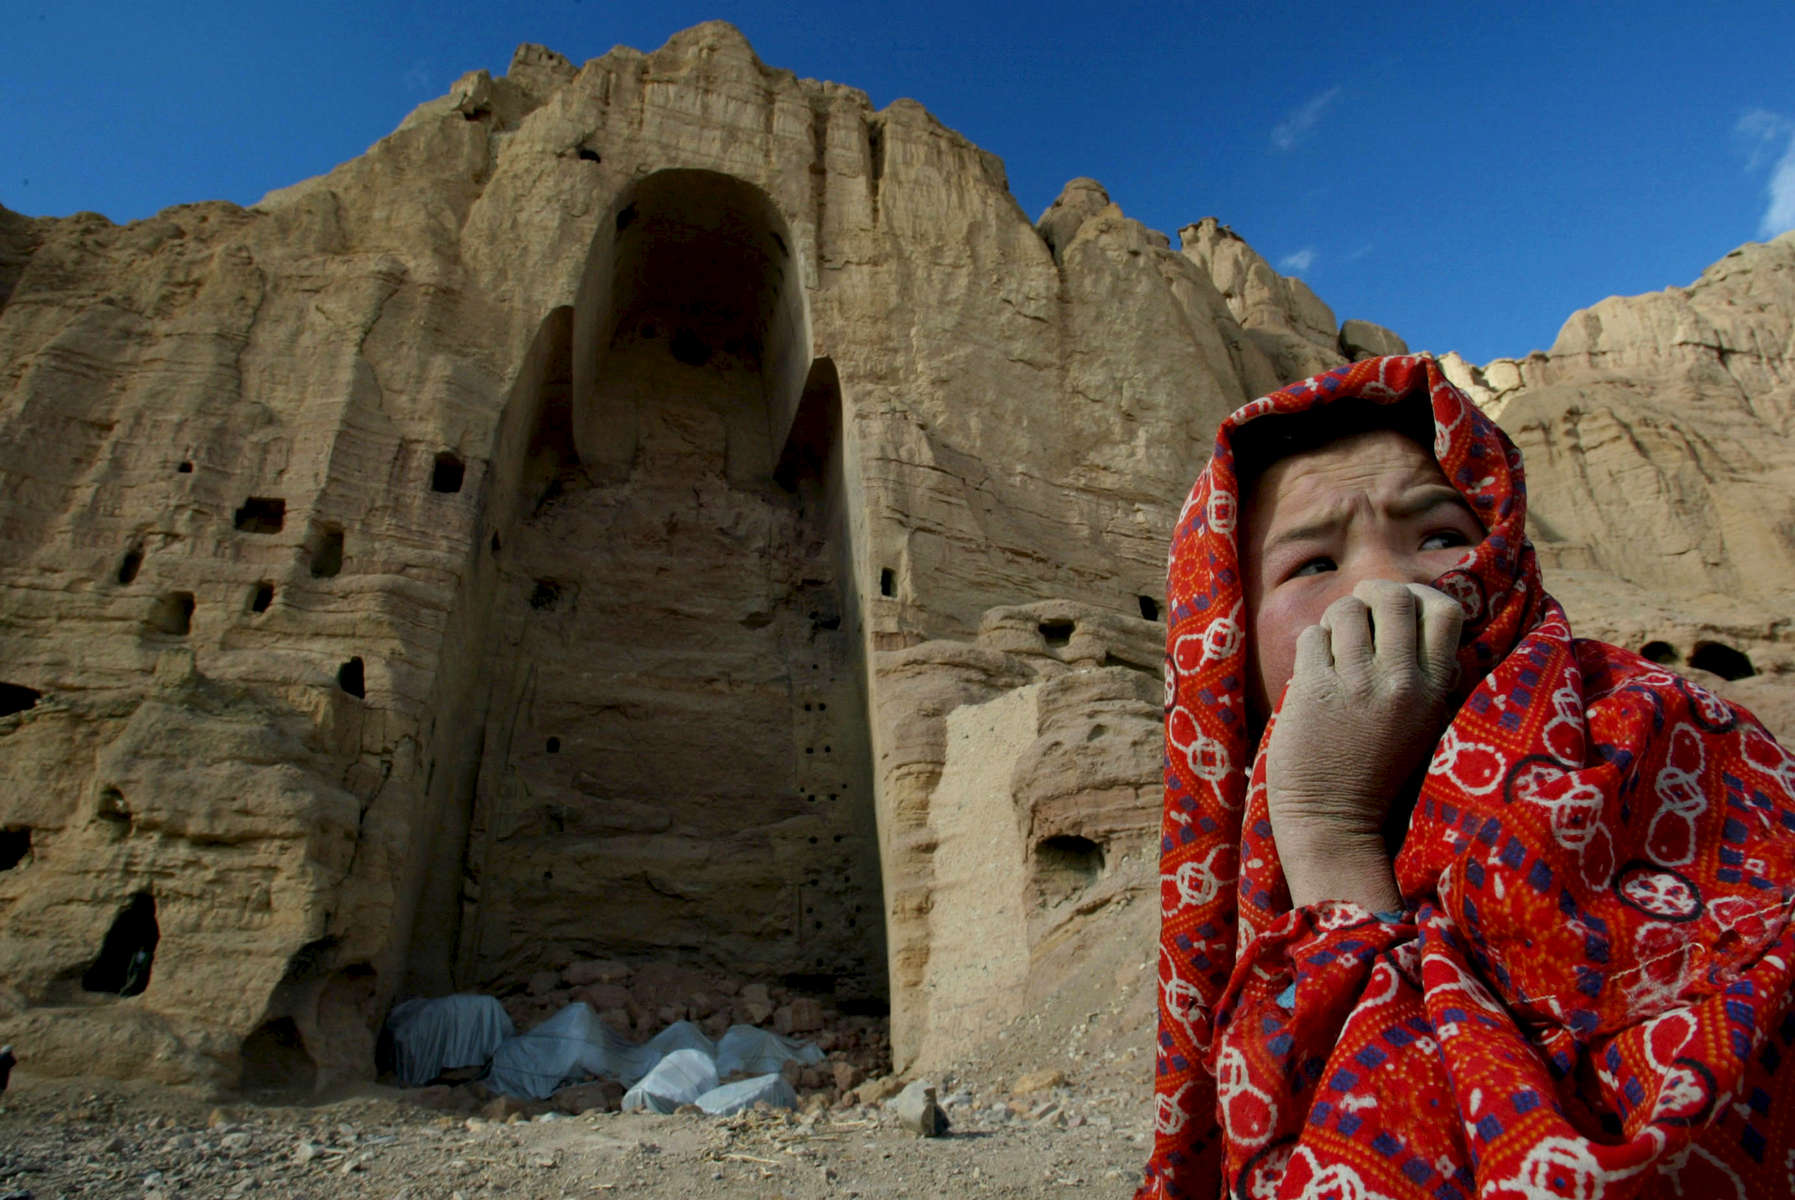 An Afghan girl who lives in the caves of Bamiyan, Afghanistan sits in front of the destroyed Buddha statue in Bamiyan, Afghanistan on February 19,2002. The ancient Buddhist statue was blown up by the Taliban in 2001. Buddha of Bamiyan,  230 km northwest of Kabul at an altitude of 2,500 meters.Paula Bronstein/Getty Images